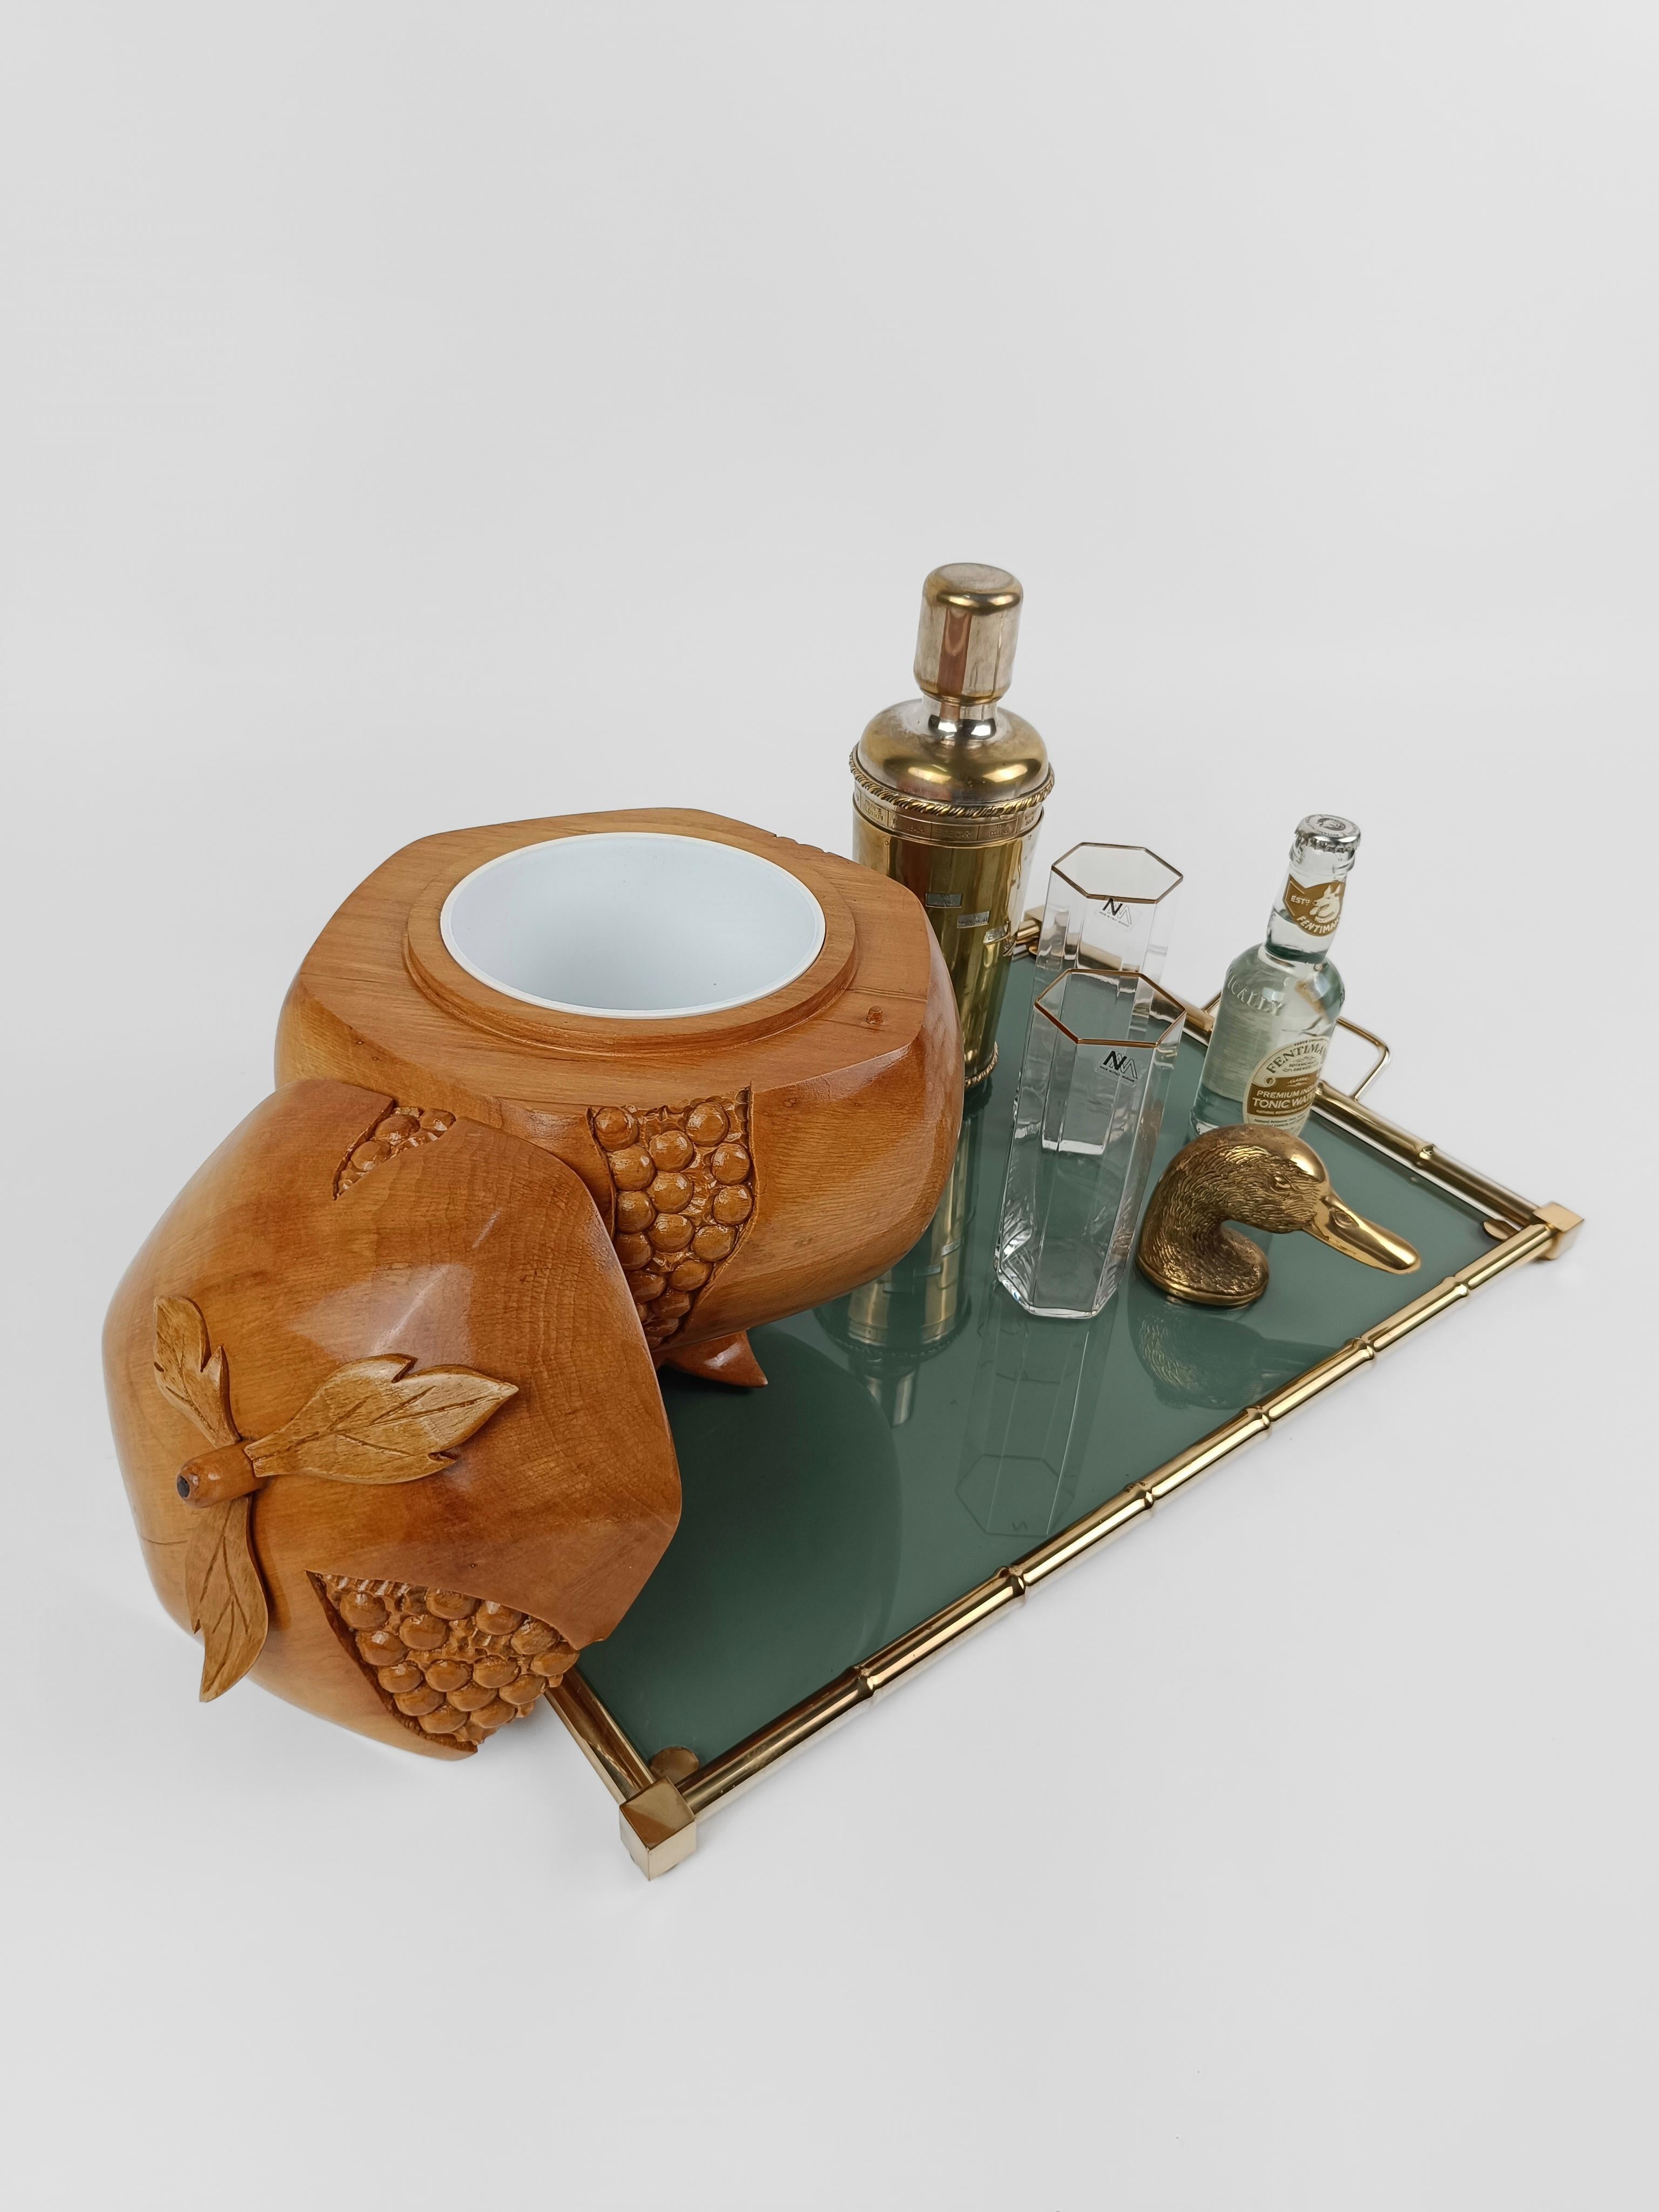 Italian Sculptural Vintage Ice Bucket in maple wood carved in the shape of a pomegranate